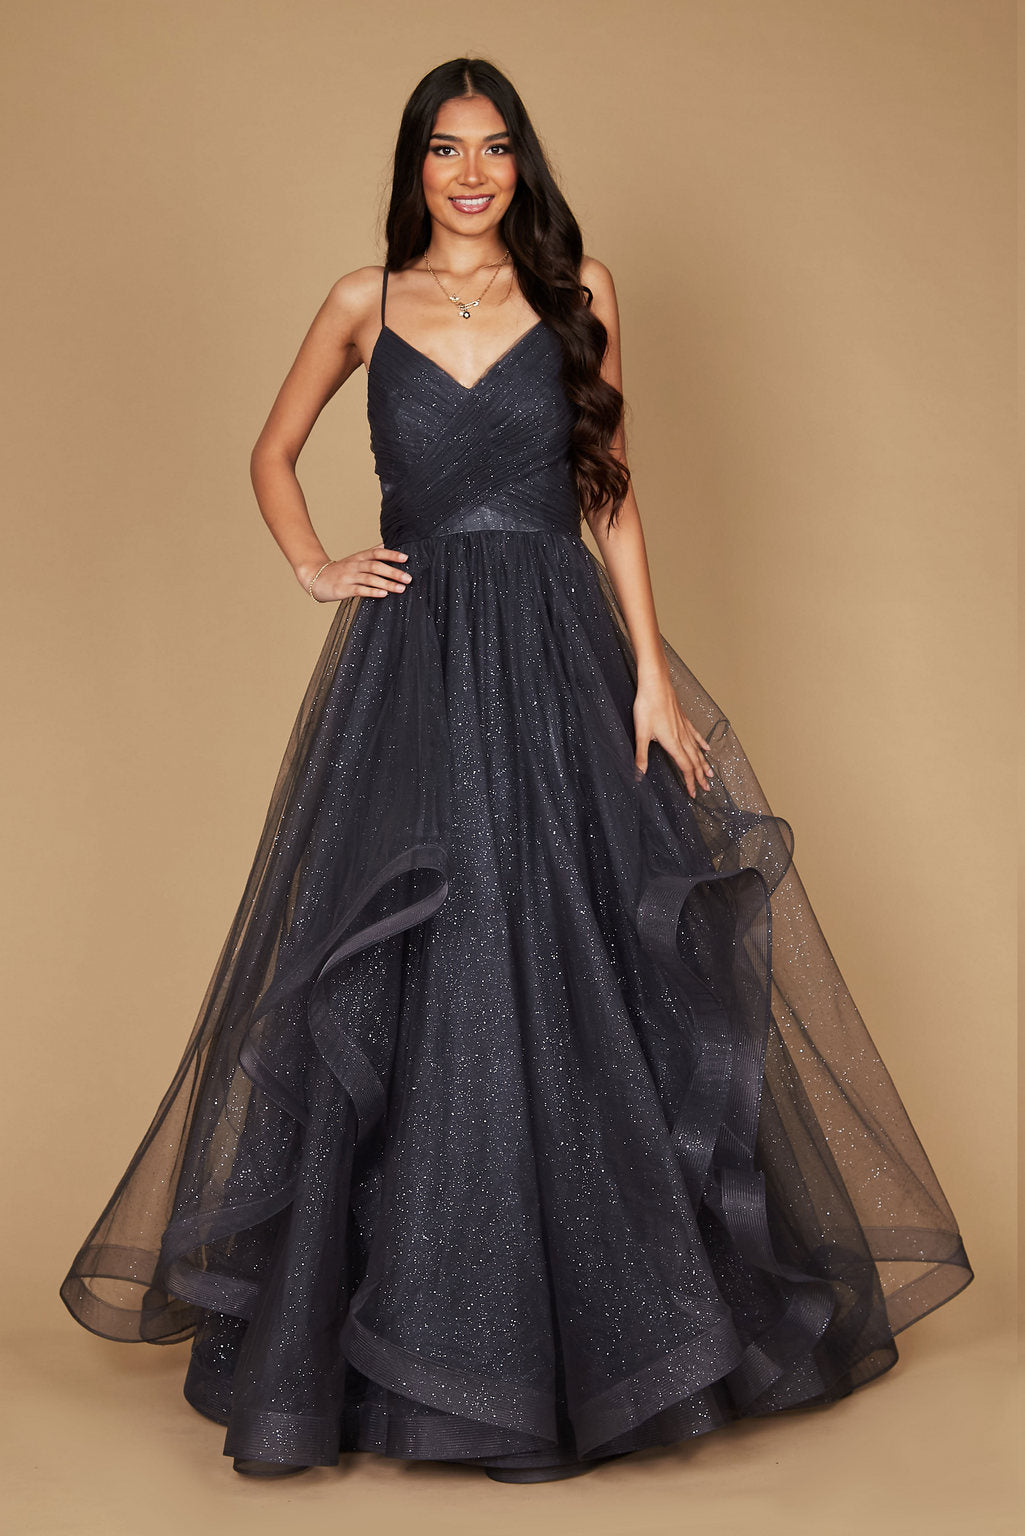 Prom Dresses Sparkling Long Formal Ball Gown